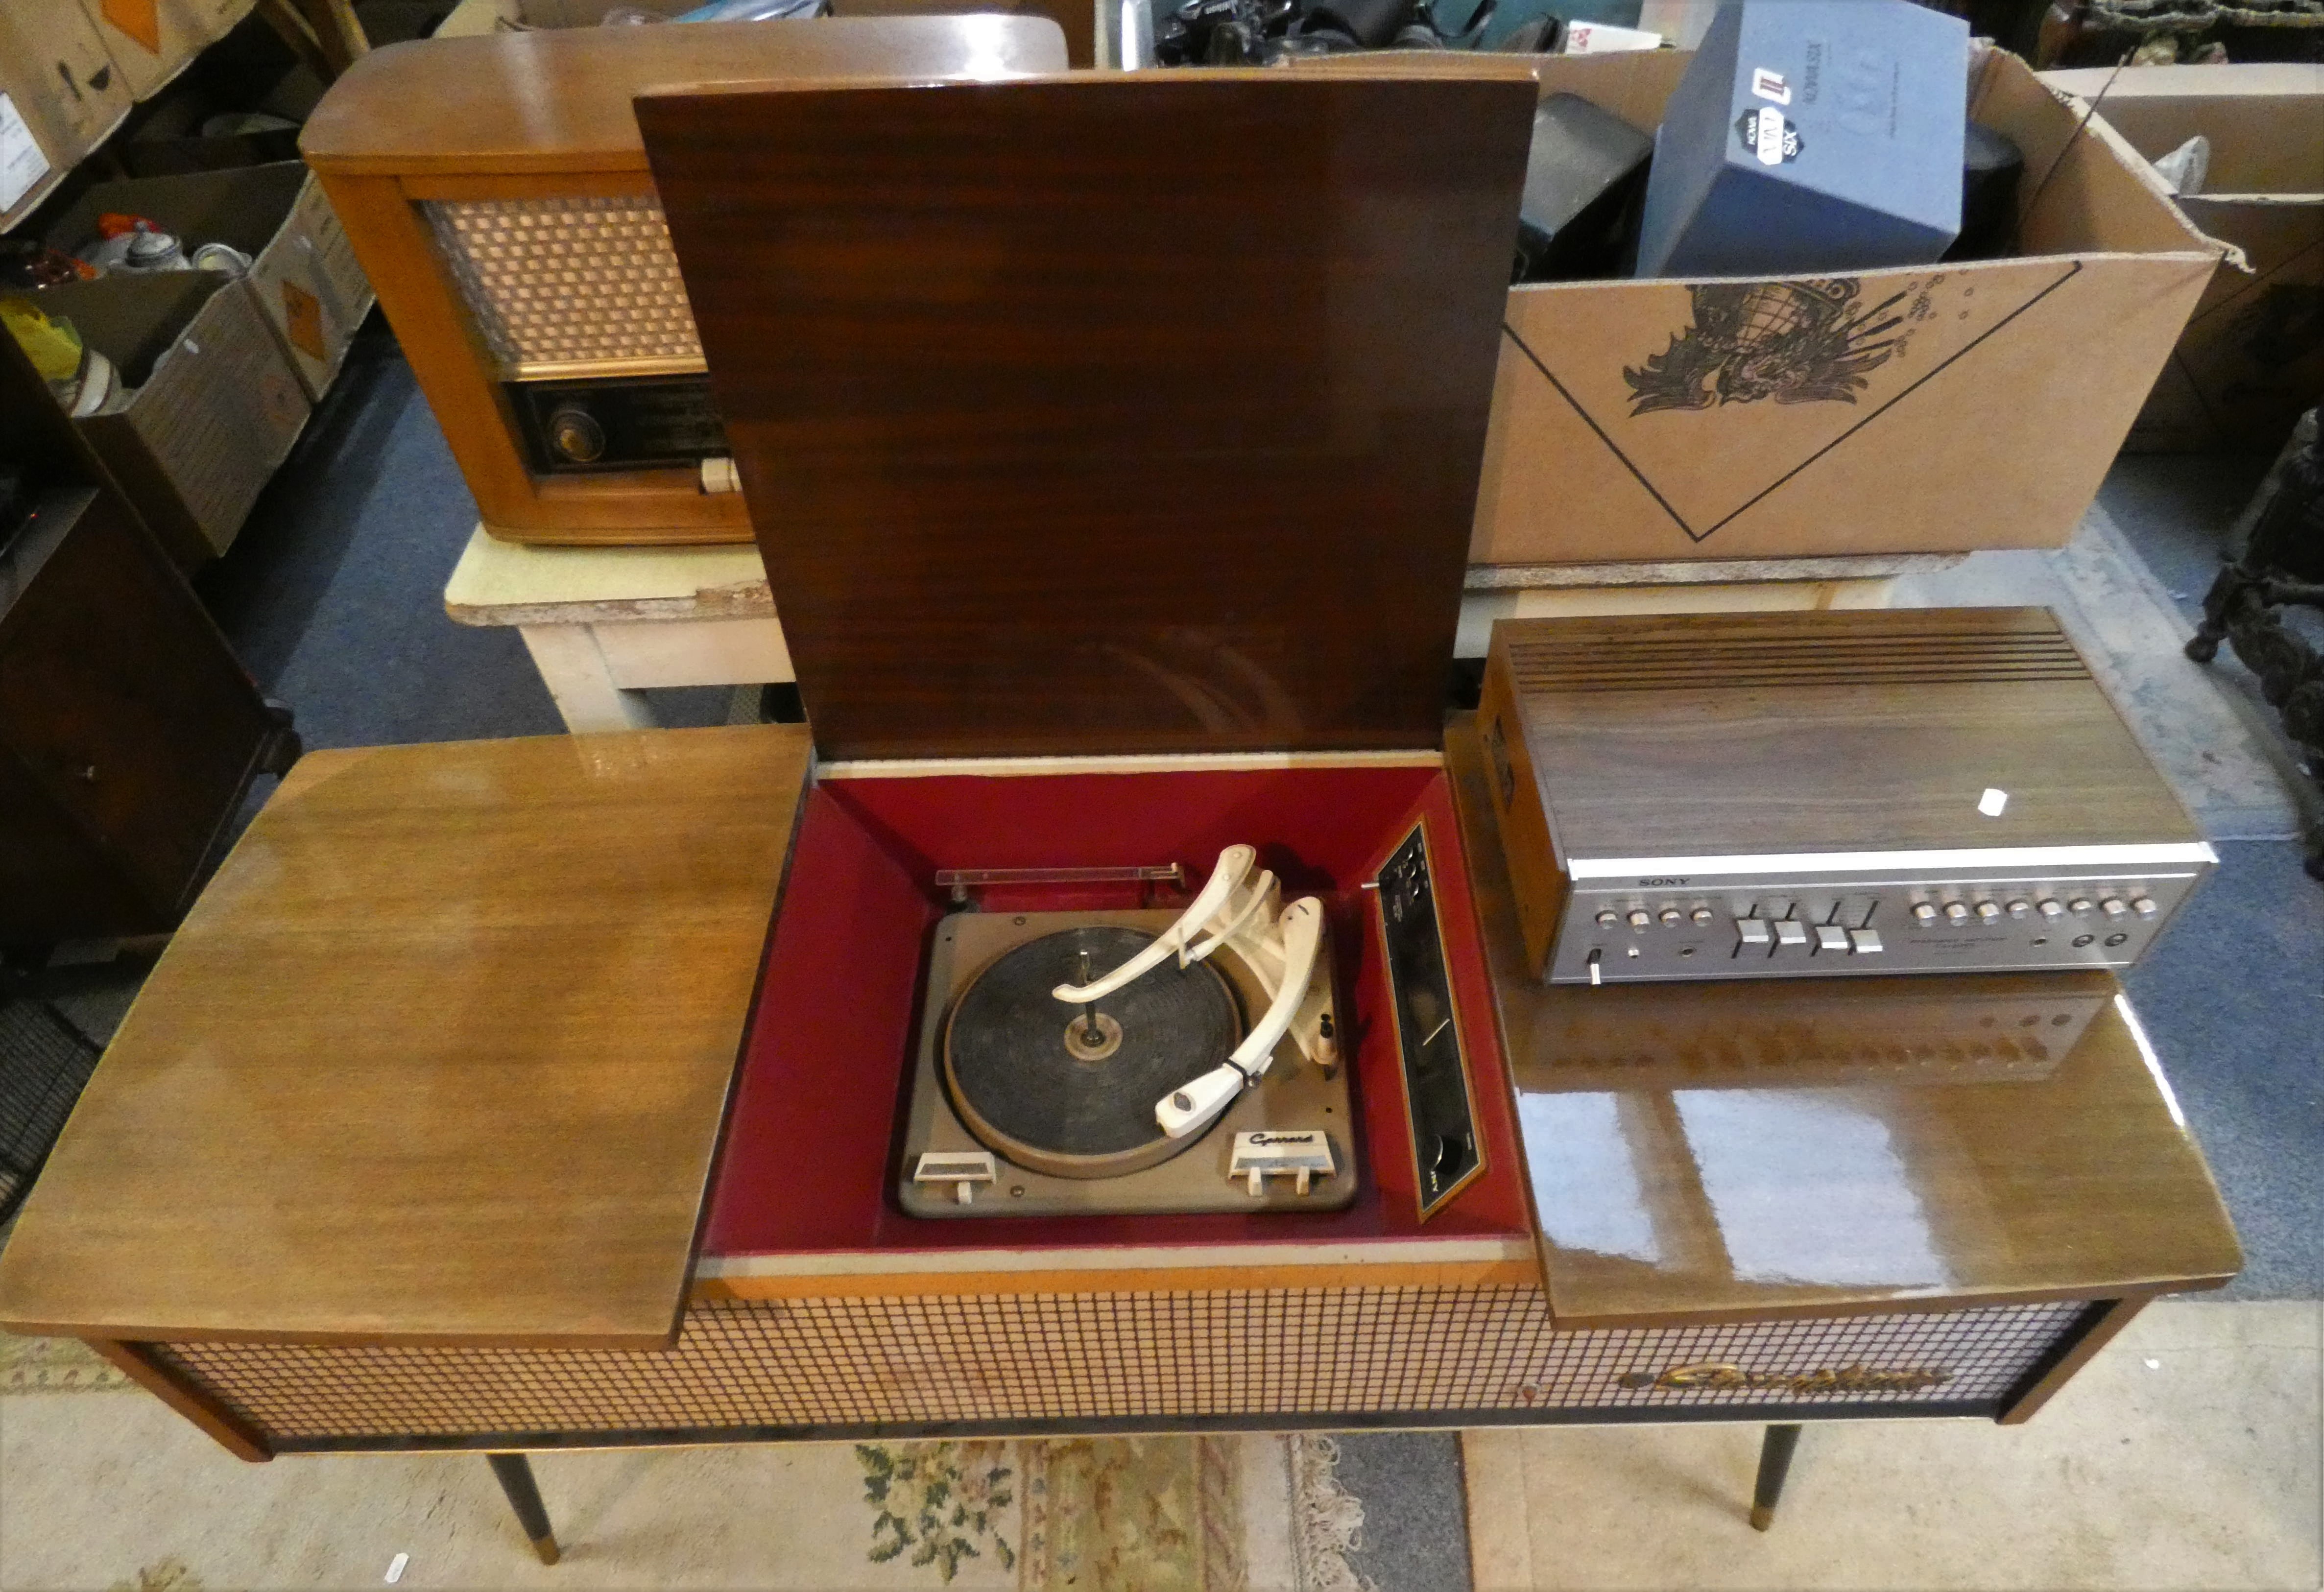 A Pye Stereophoe Black Box radiogram with Garrad deck, with additional Sony integrated amplifier